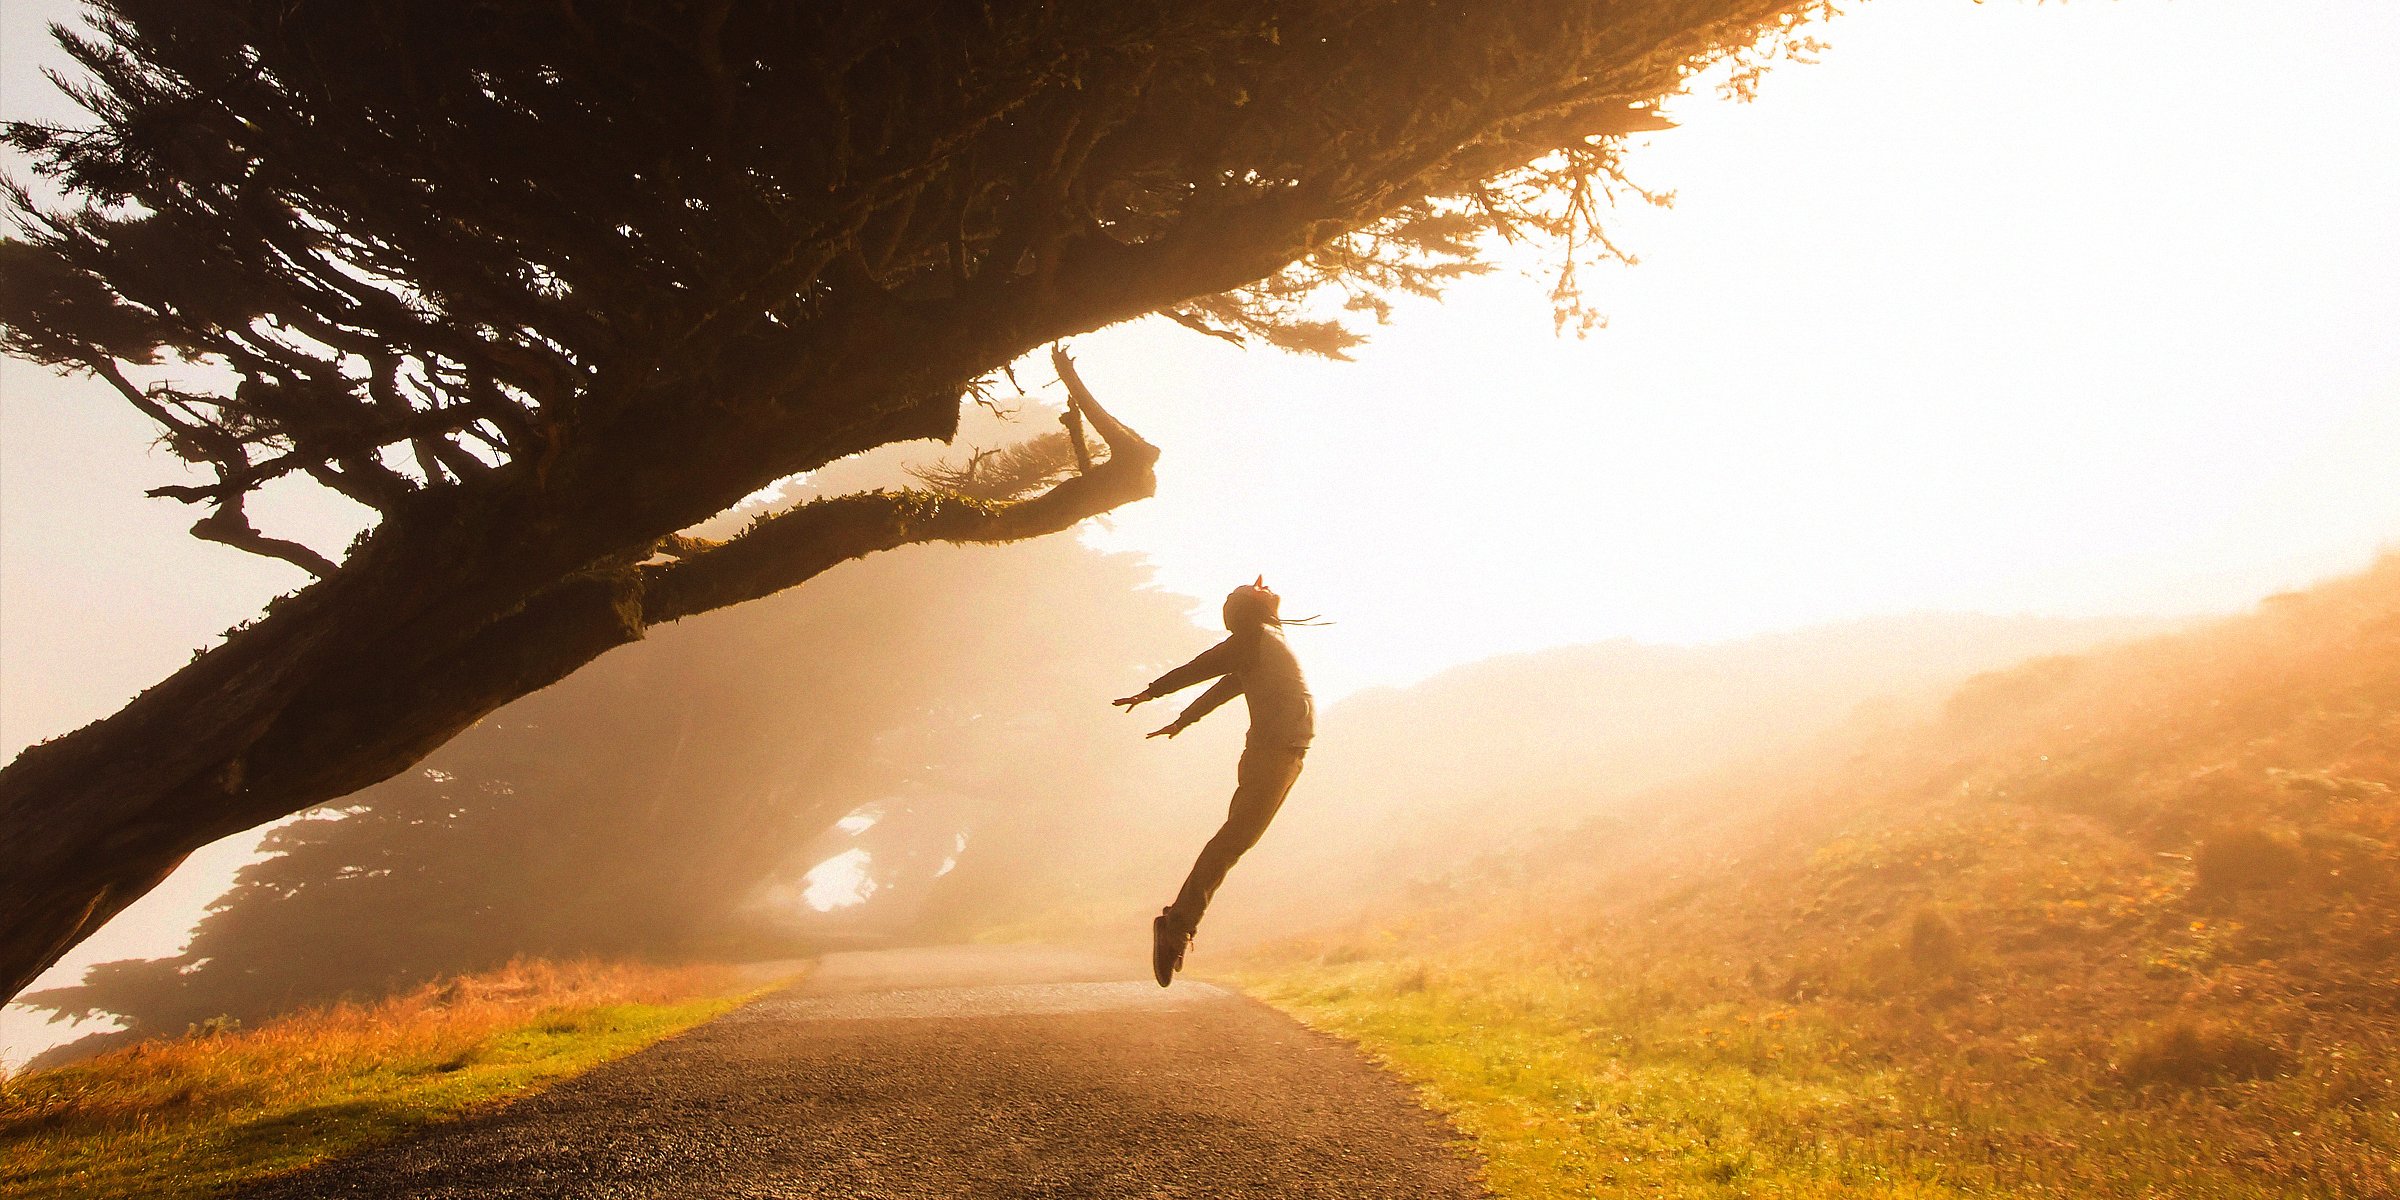 An excited person taking a leap at sunrise | Source: Unsplash.com